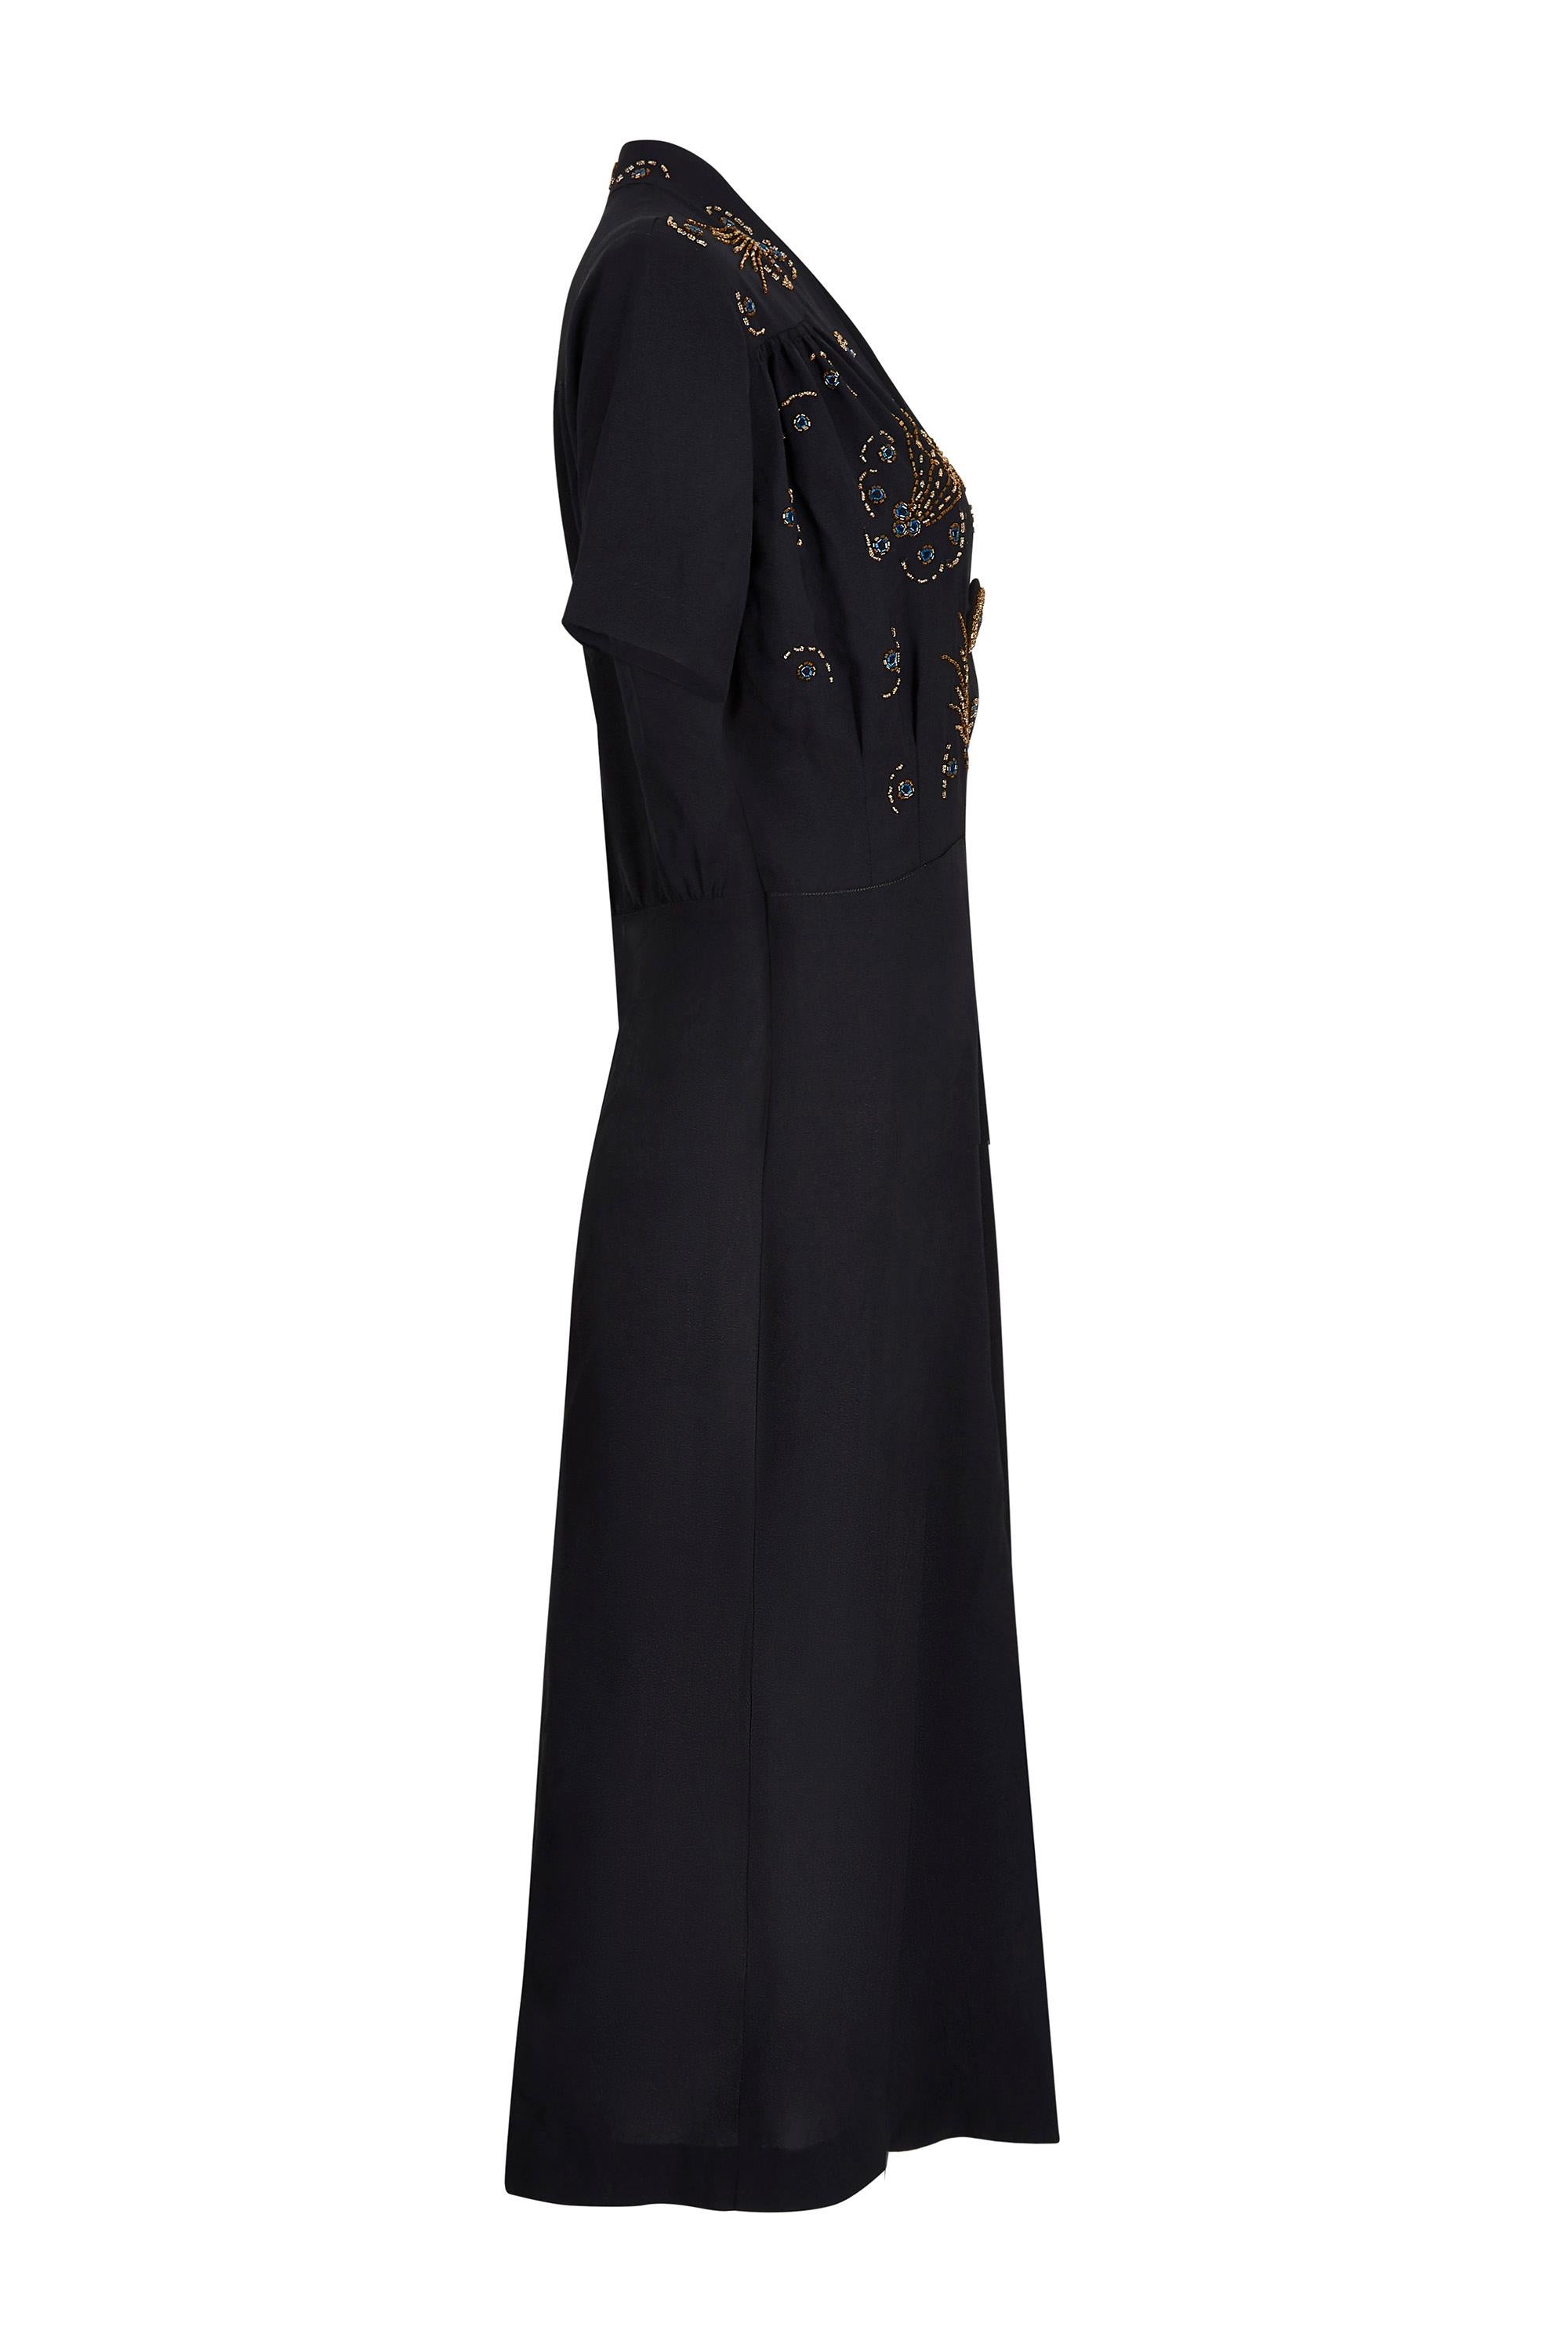 This desirable 1930s/late1940s black wool crepe dress is beautifully made and in exceptional vintage condition with no issues of any note. The dress is a simple shift cut with wide, elbow length sleeves, V-neckline and beaded cross over bodice. The